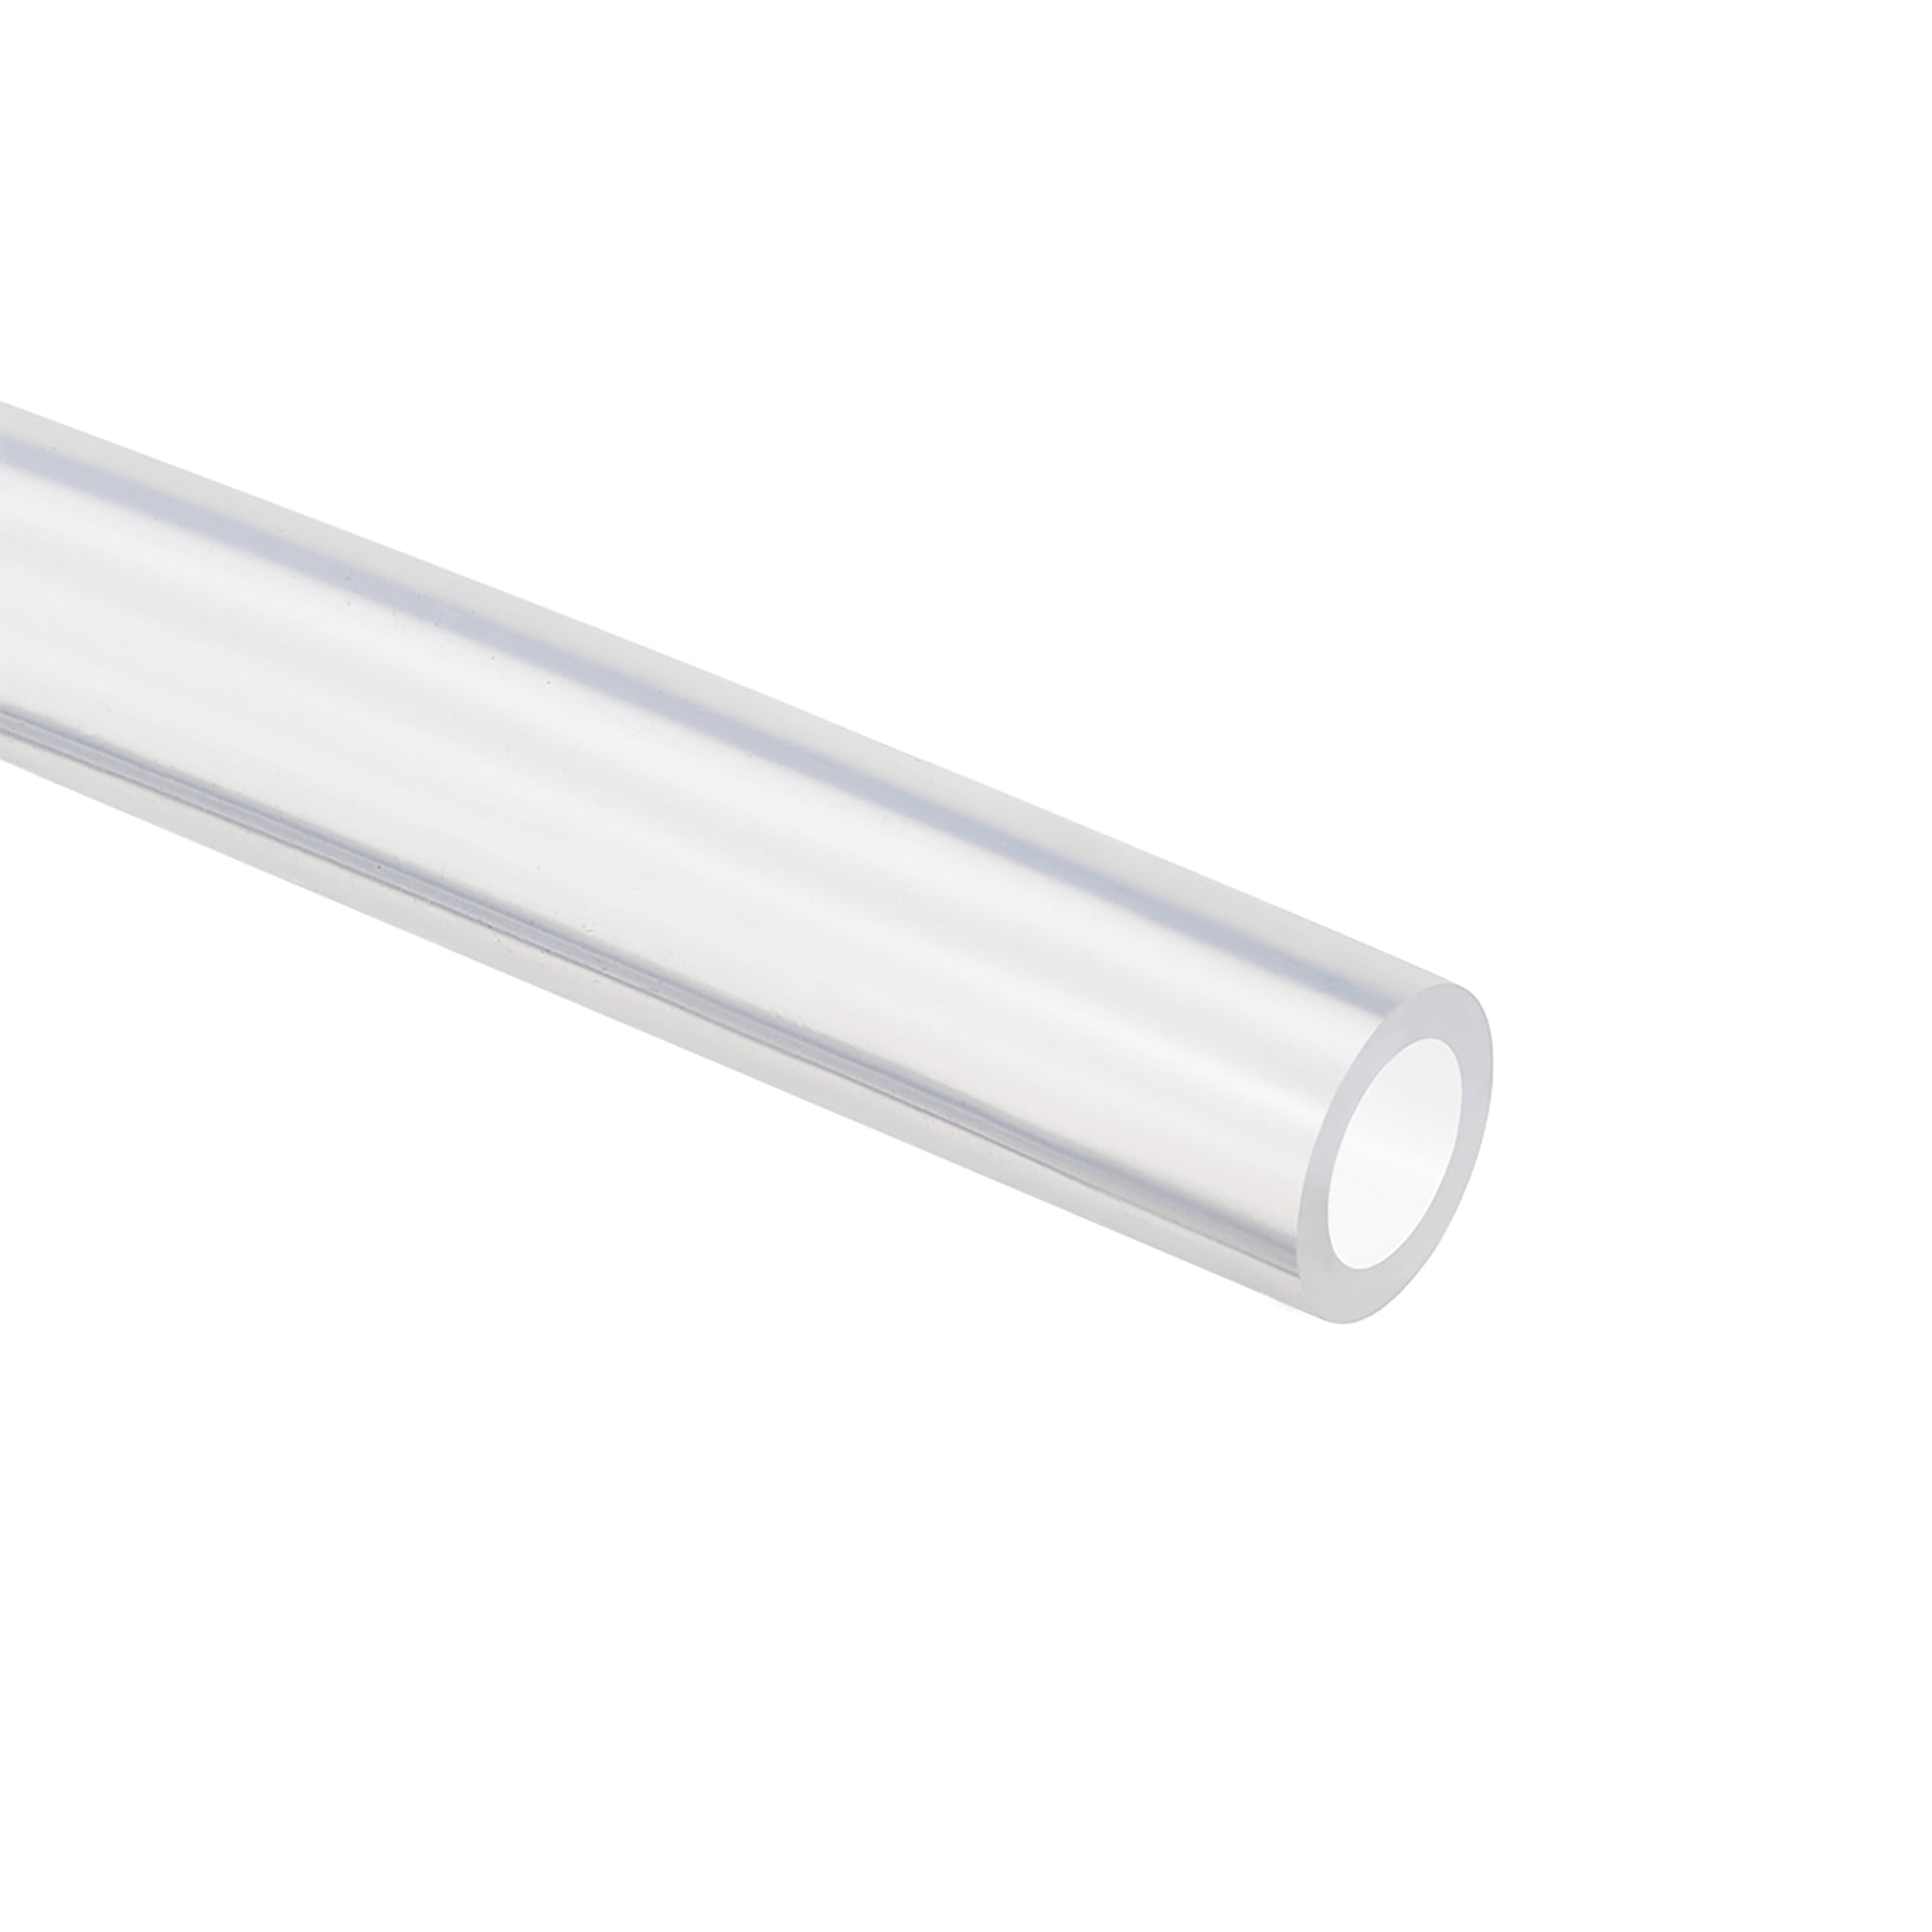 Silicone Tubing, 1/16 inch(1.6mm) ID x 3/16 inch(4.8mm) OD 3.3ft 1m  Flexible Rubber Tube Pipe for Pump Transfer Clear 